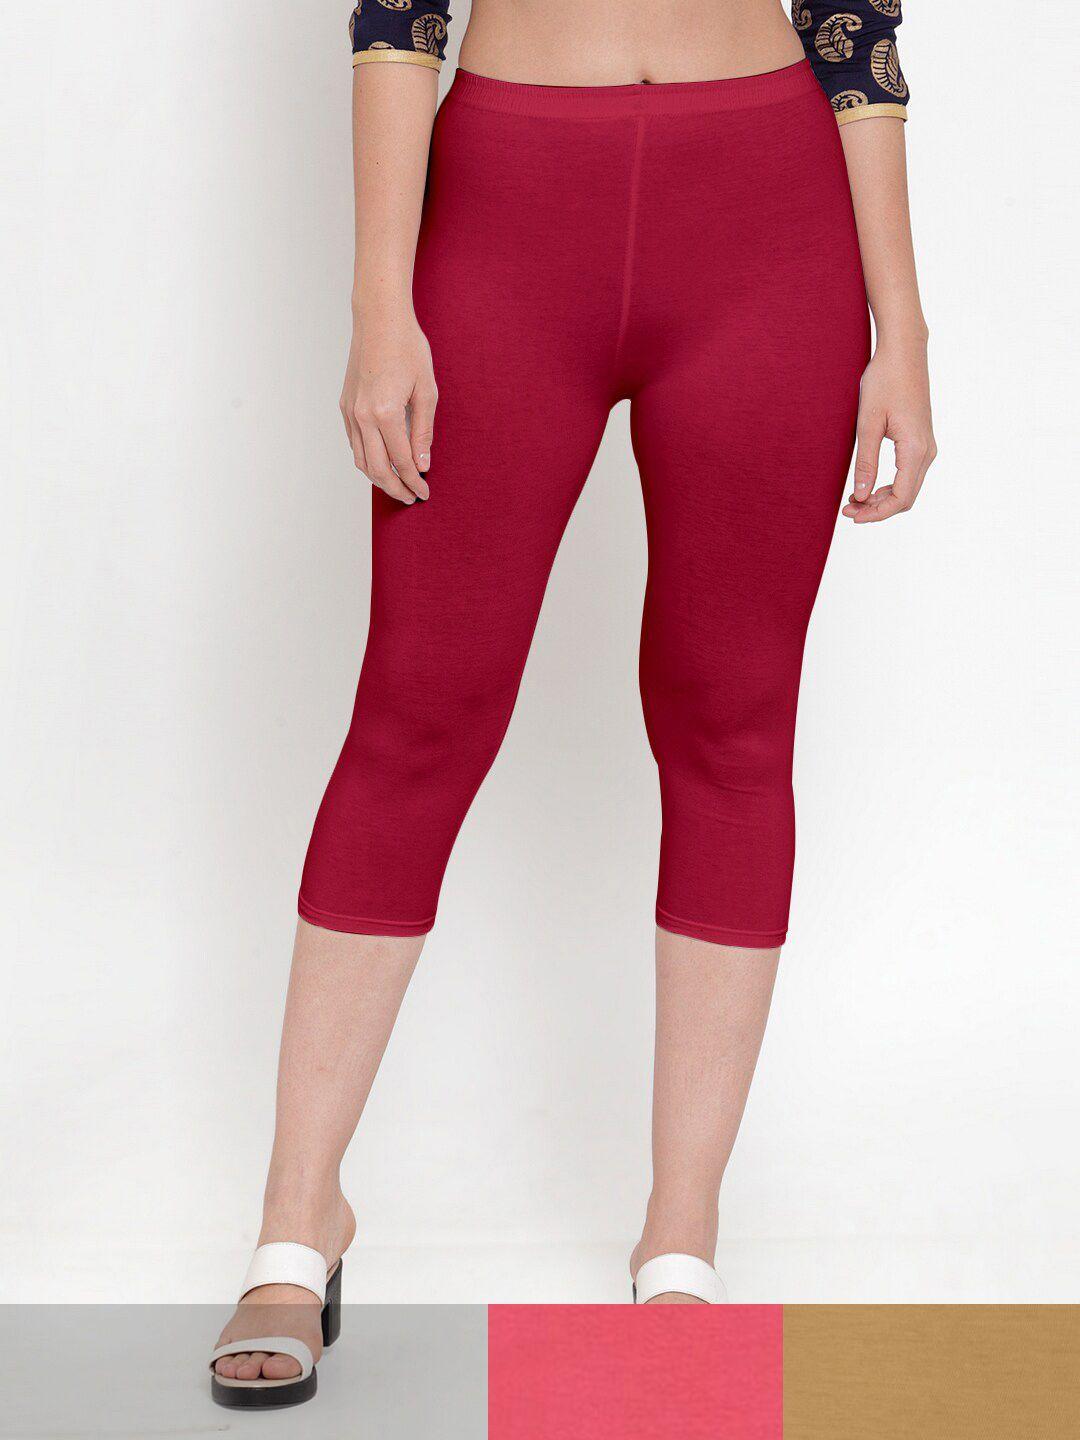 jinfo women maroon & peach-coloured pack of 3 solid capris